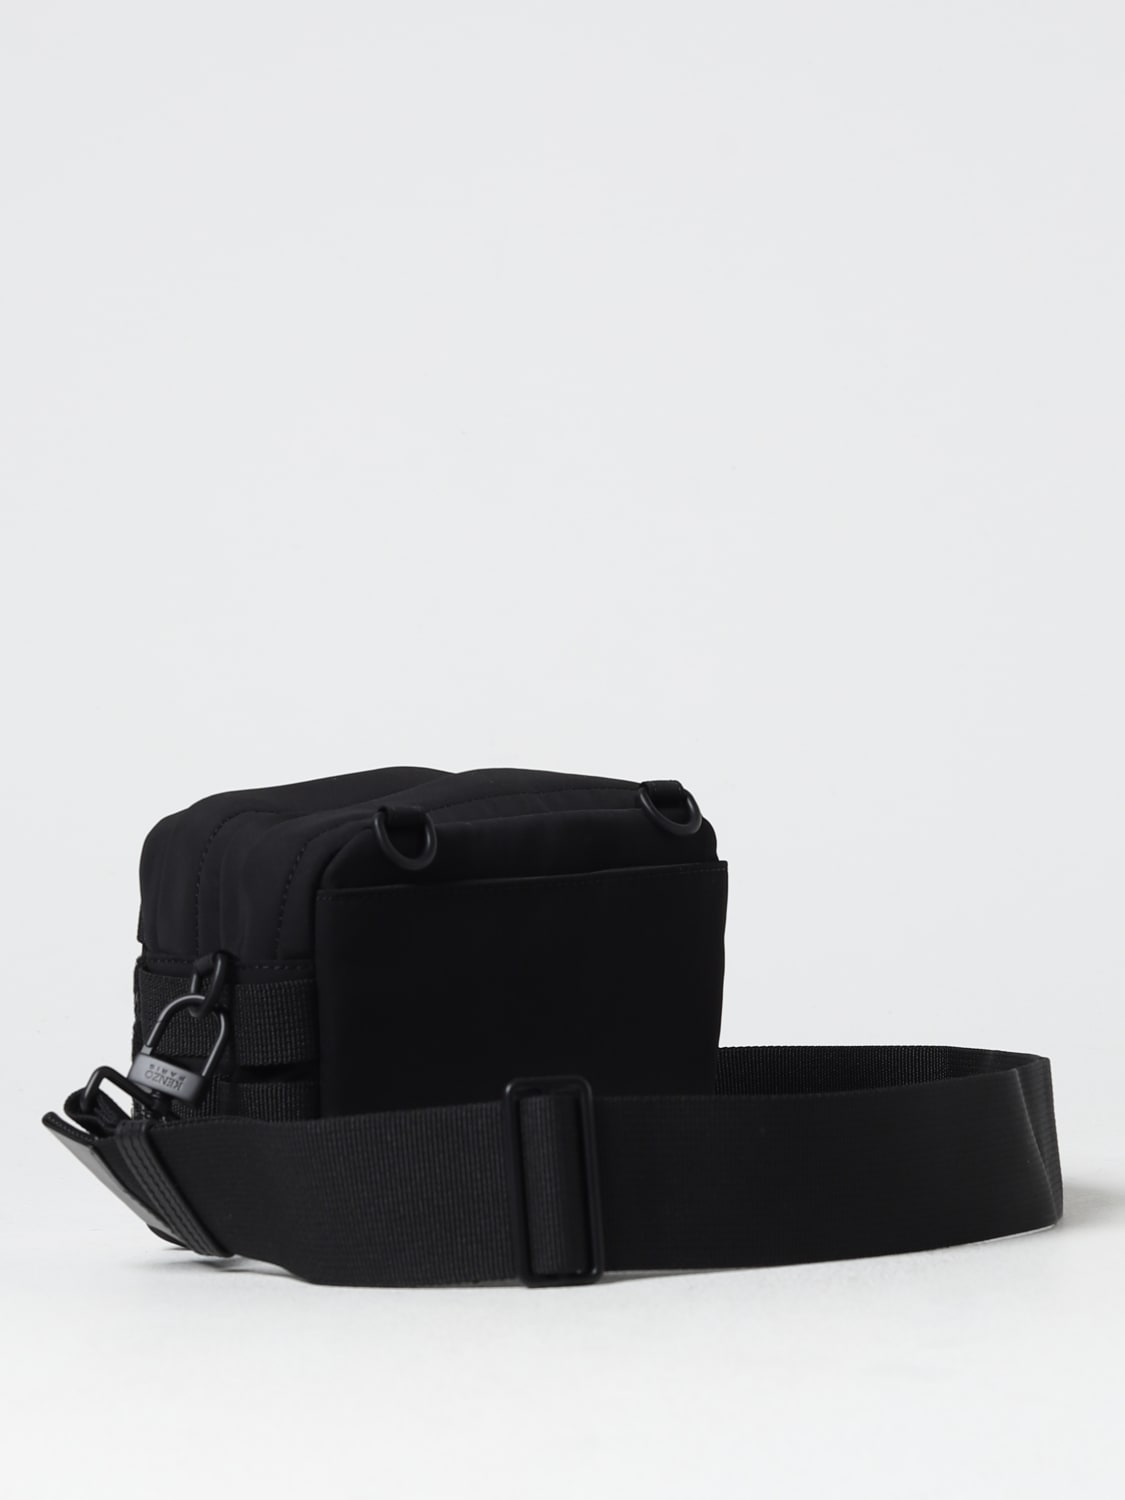 KENZO: jungle bag in nylon with patch - Black | Kenzo shoulder bag ...